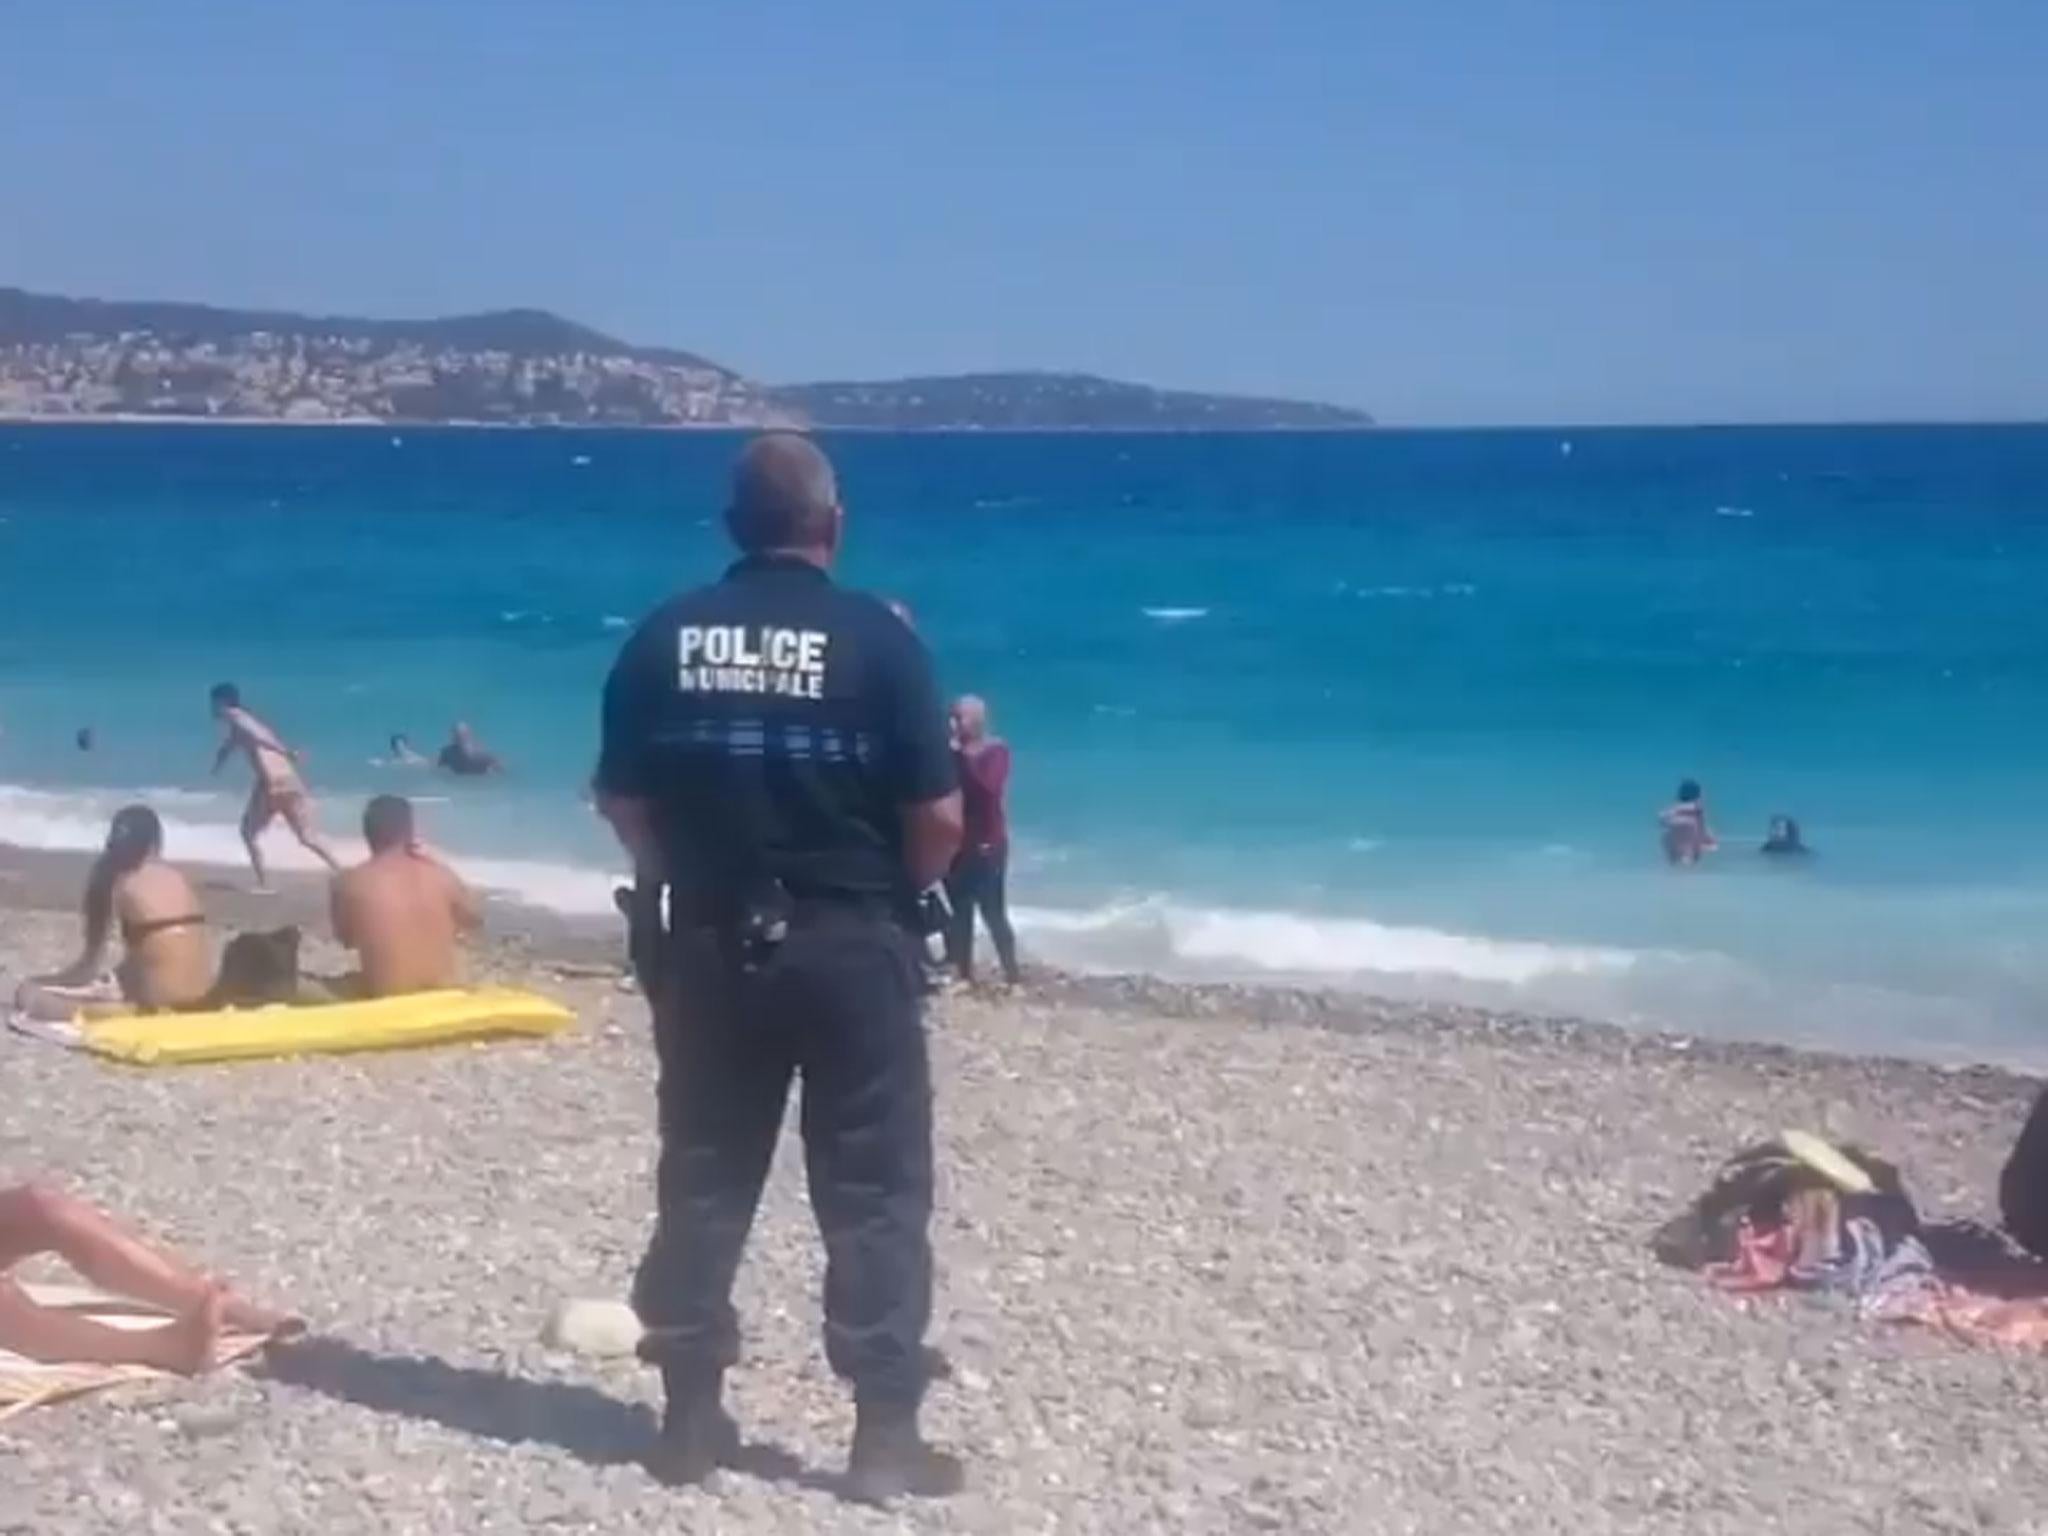 Police on the beach in Nice confront a woman in a burkini